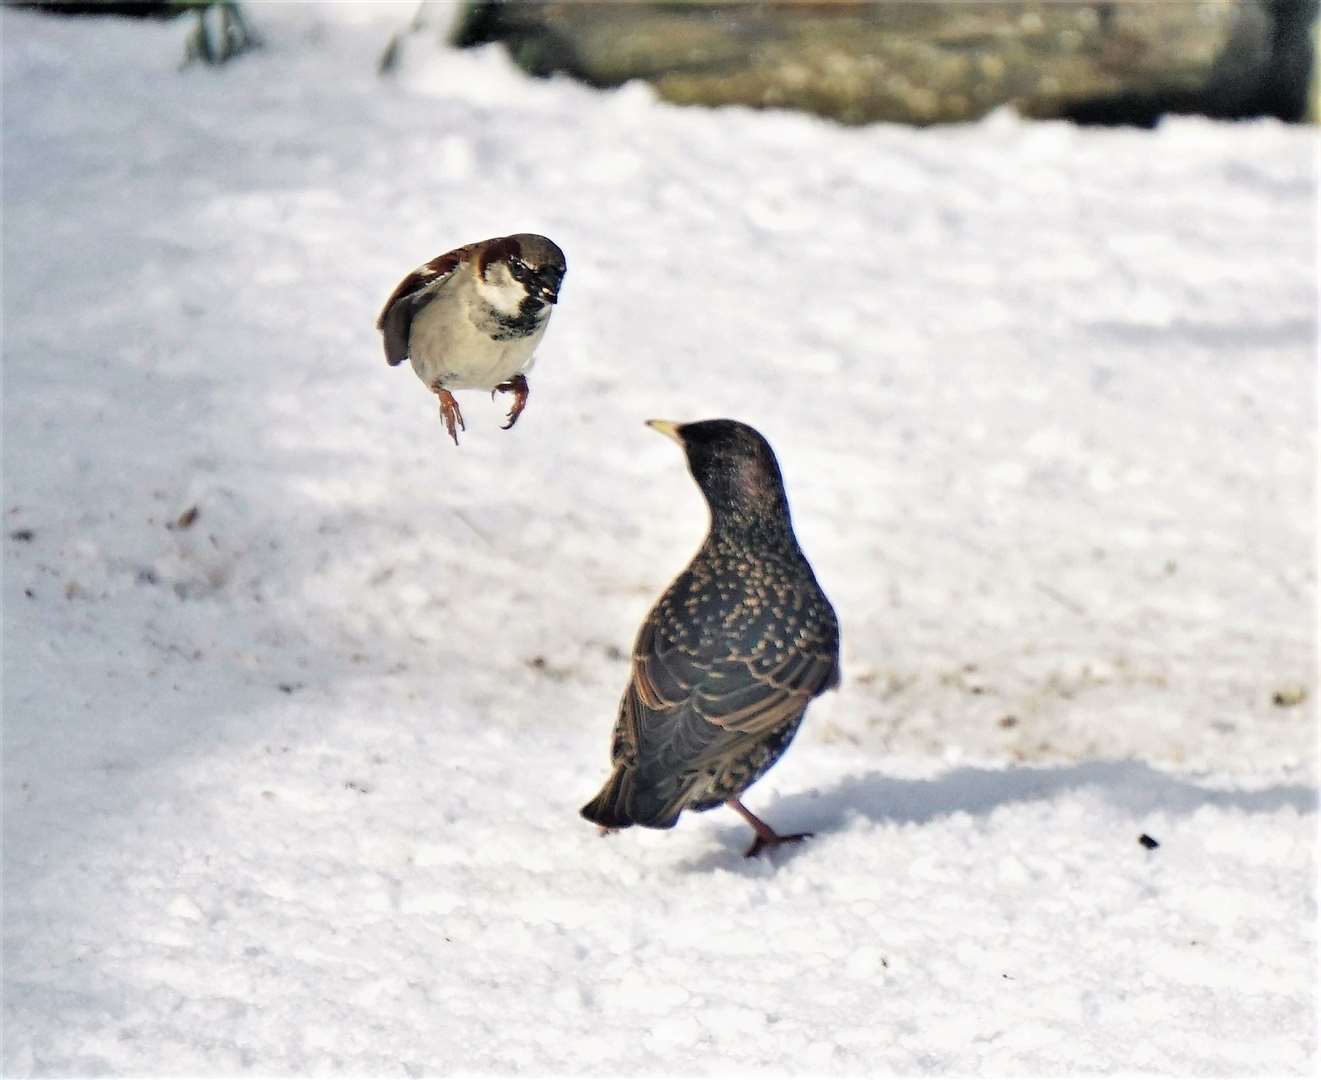 The same sparrow seen a fraction of a second later without its trusty steed after the rat had gone by. Picture: DGS